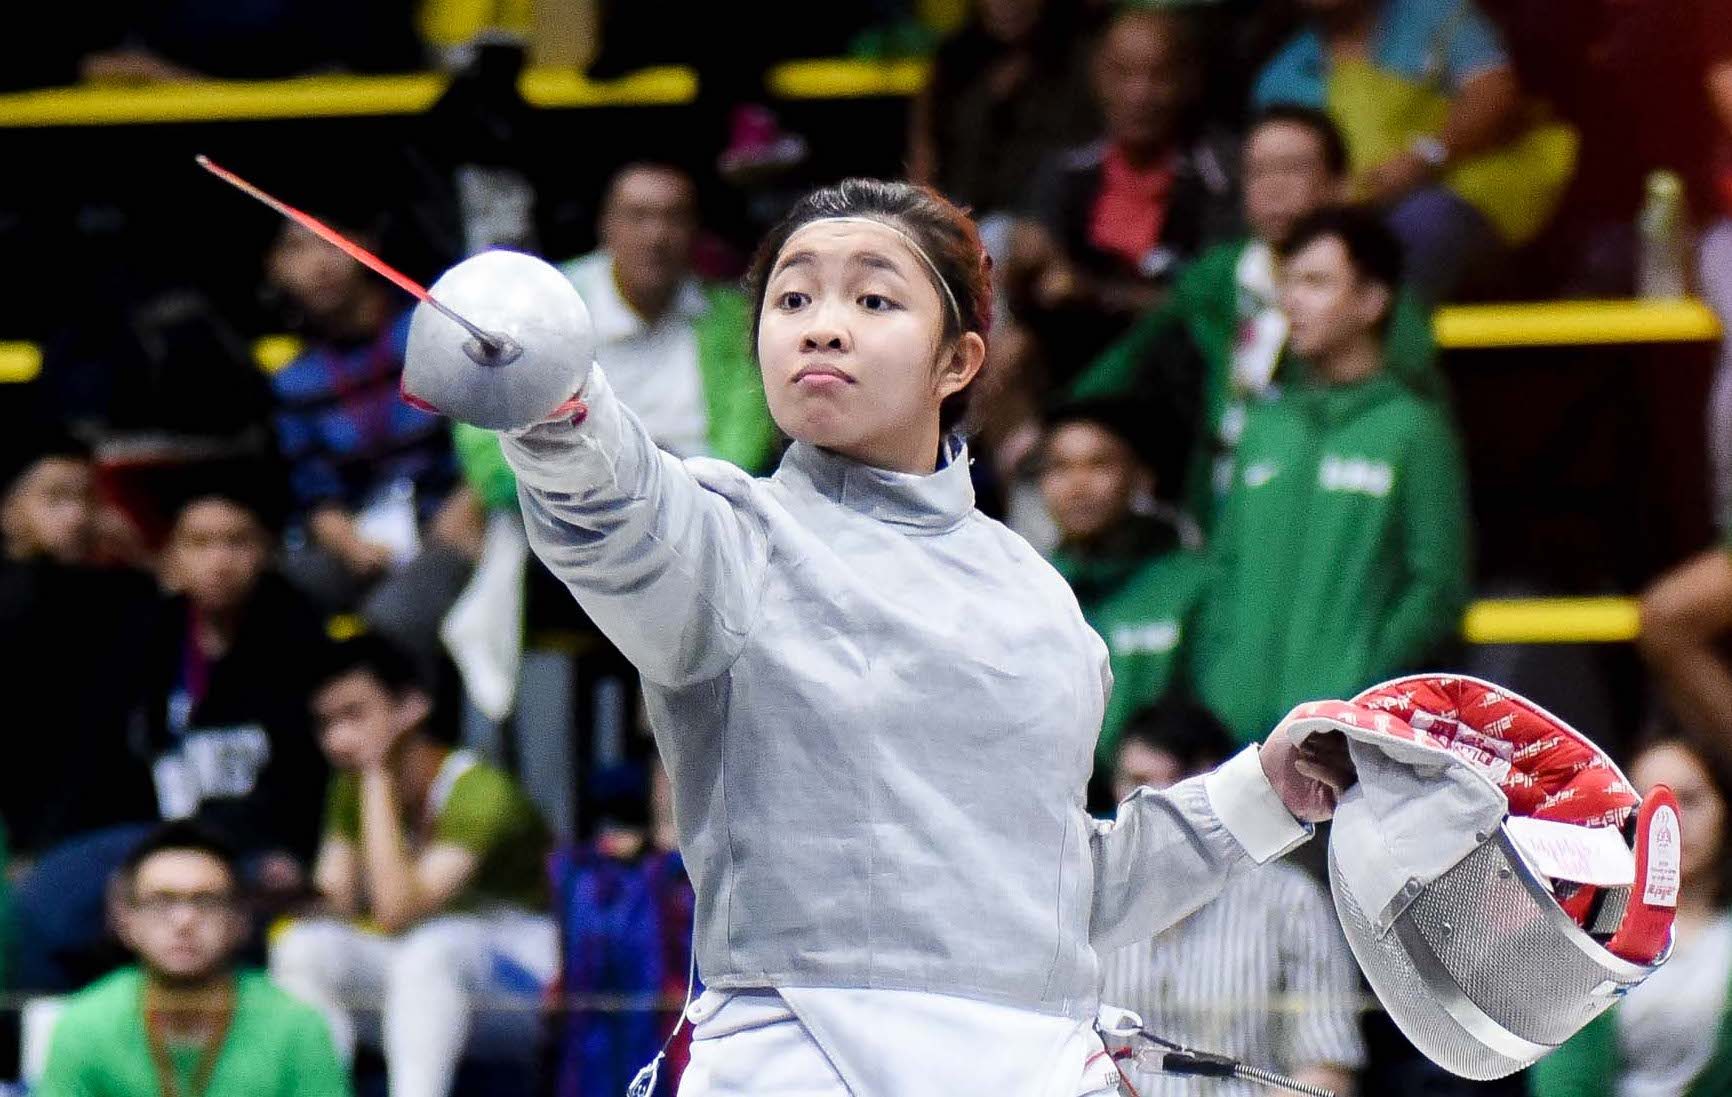 PH top fencer seeks private support for World Championships